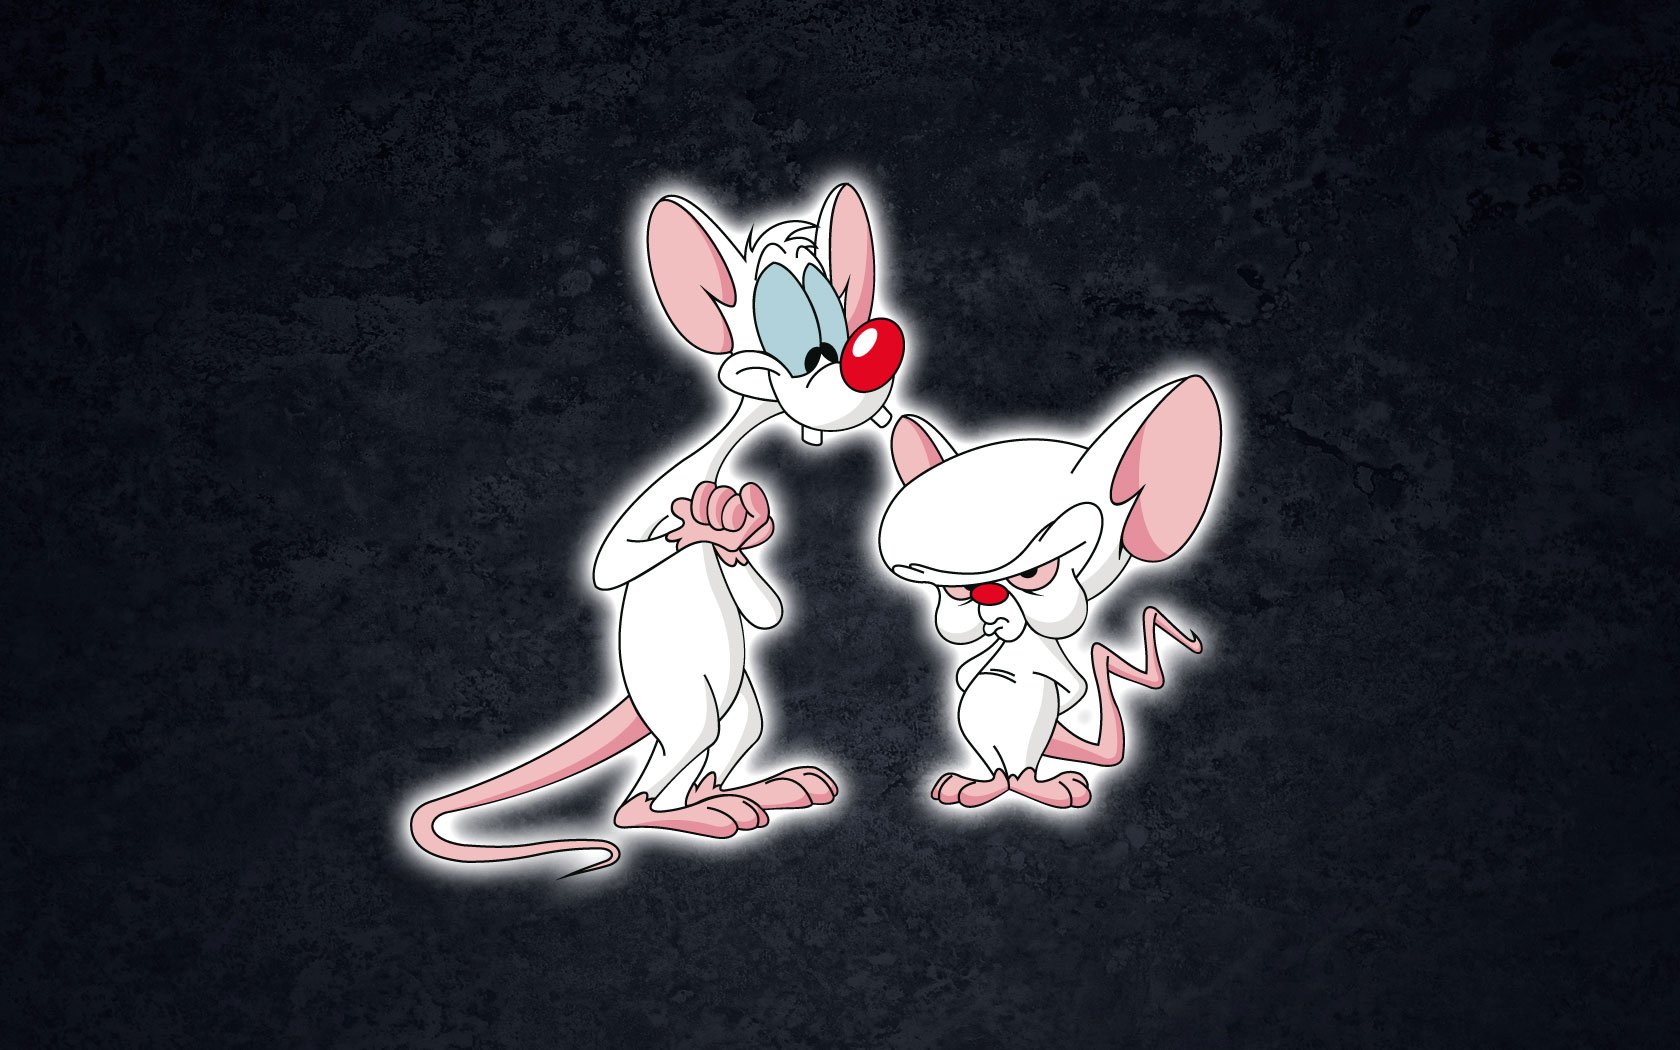 Pinky and The Brain by cesaraquino on